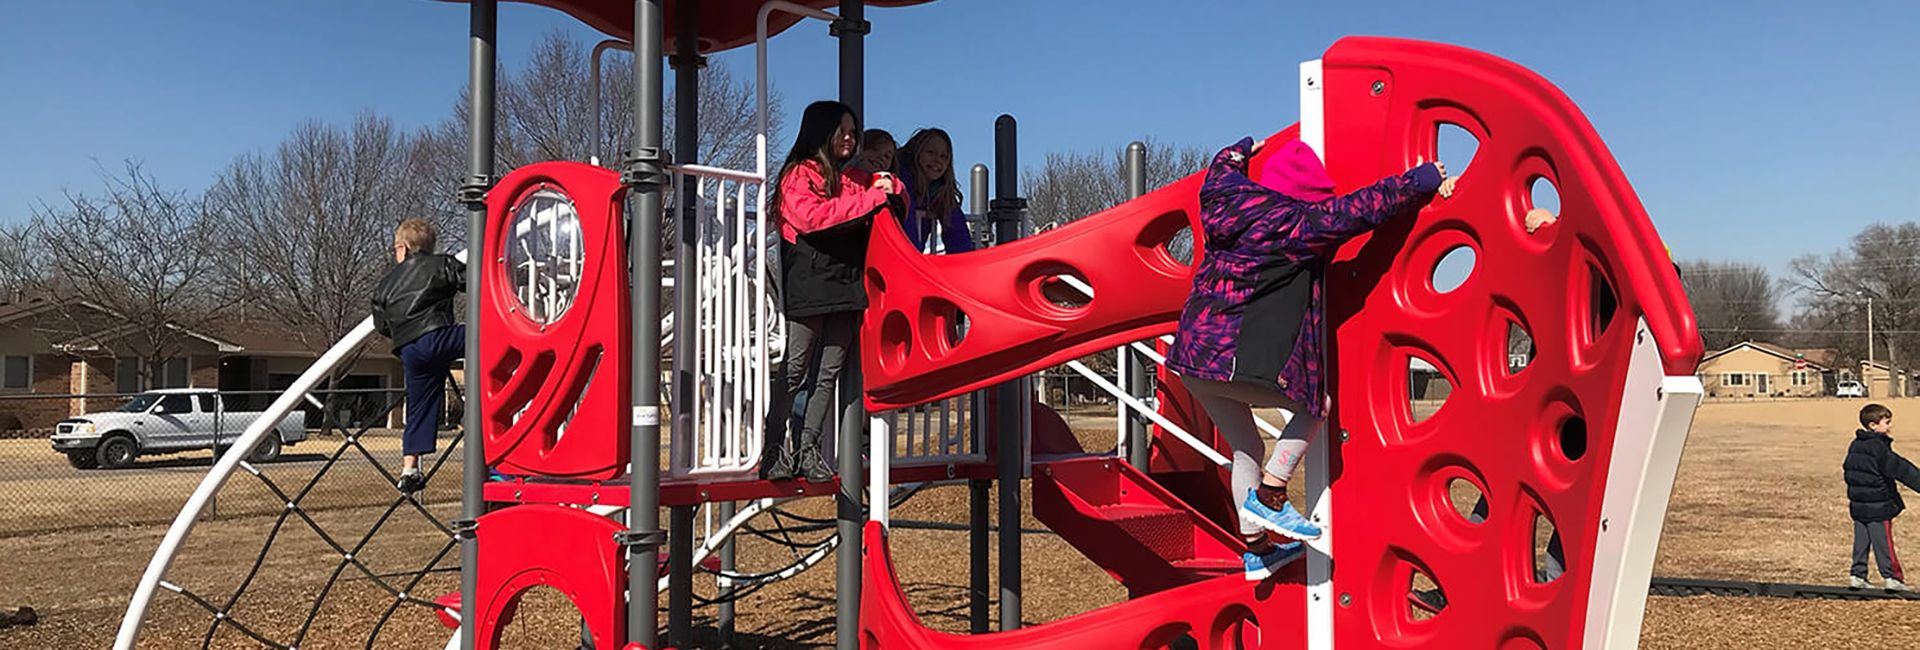 Featured image of Children playing on red colored bar with holes at playground